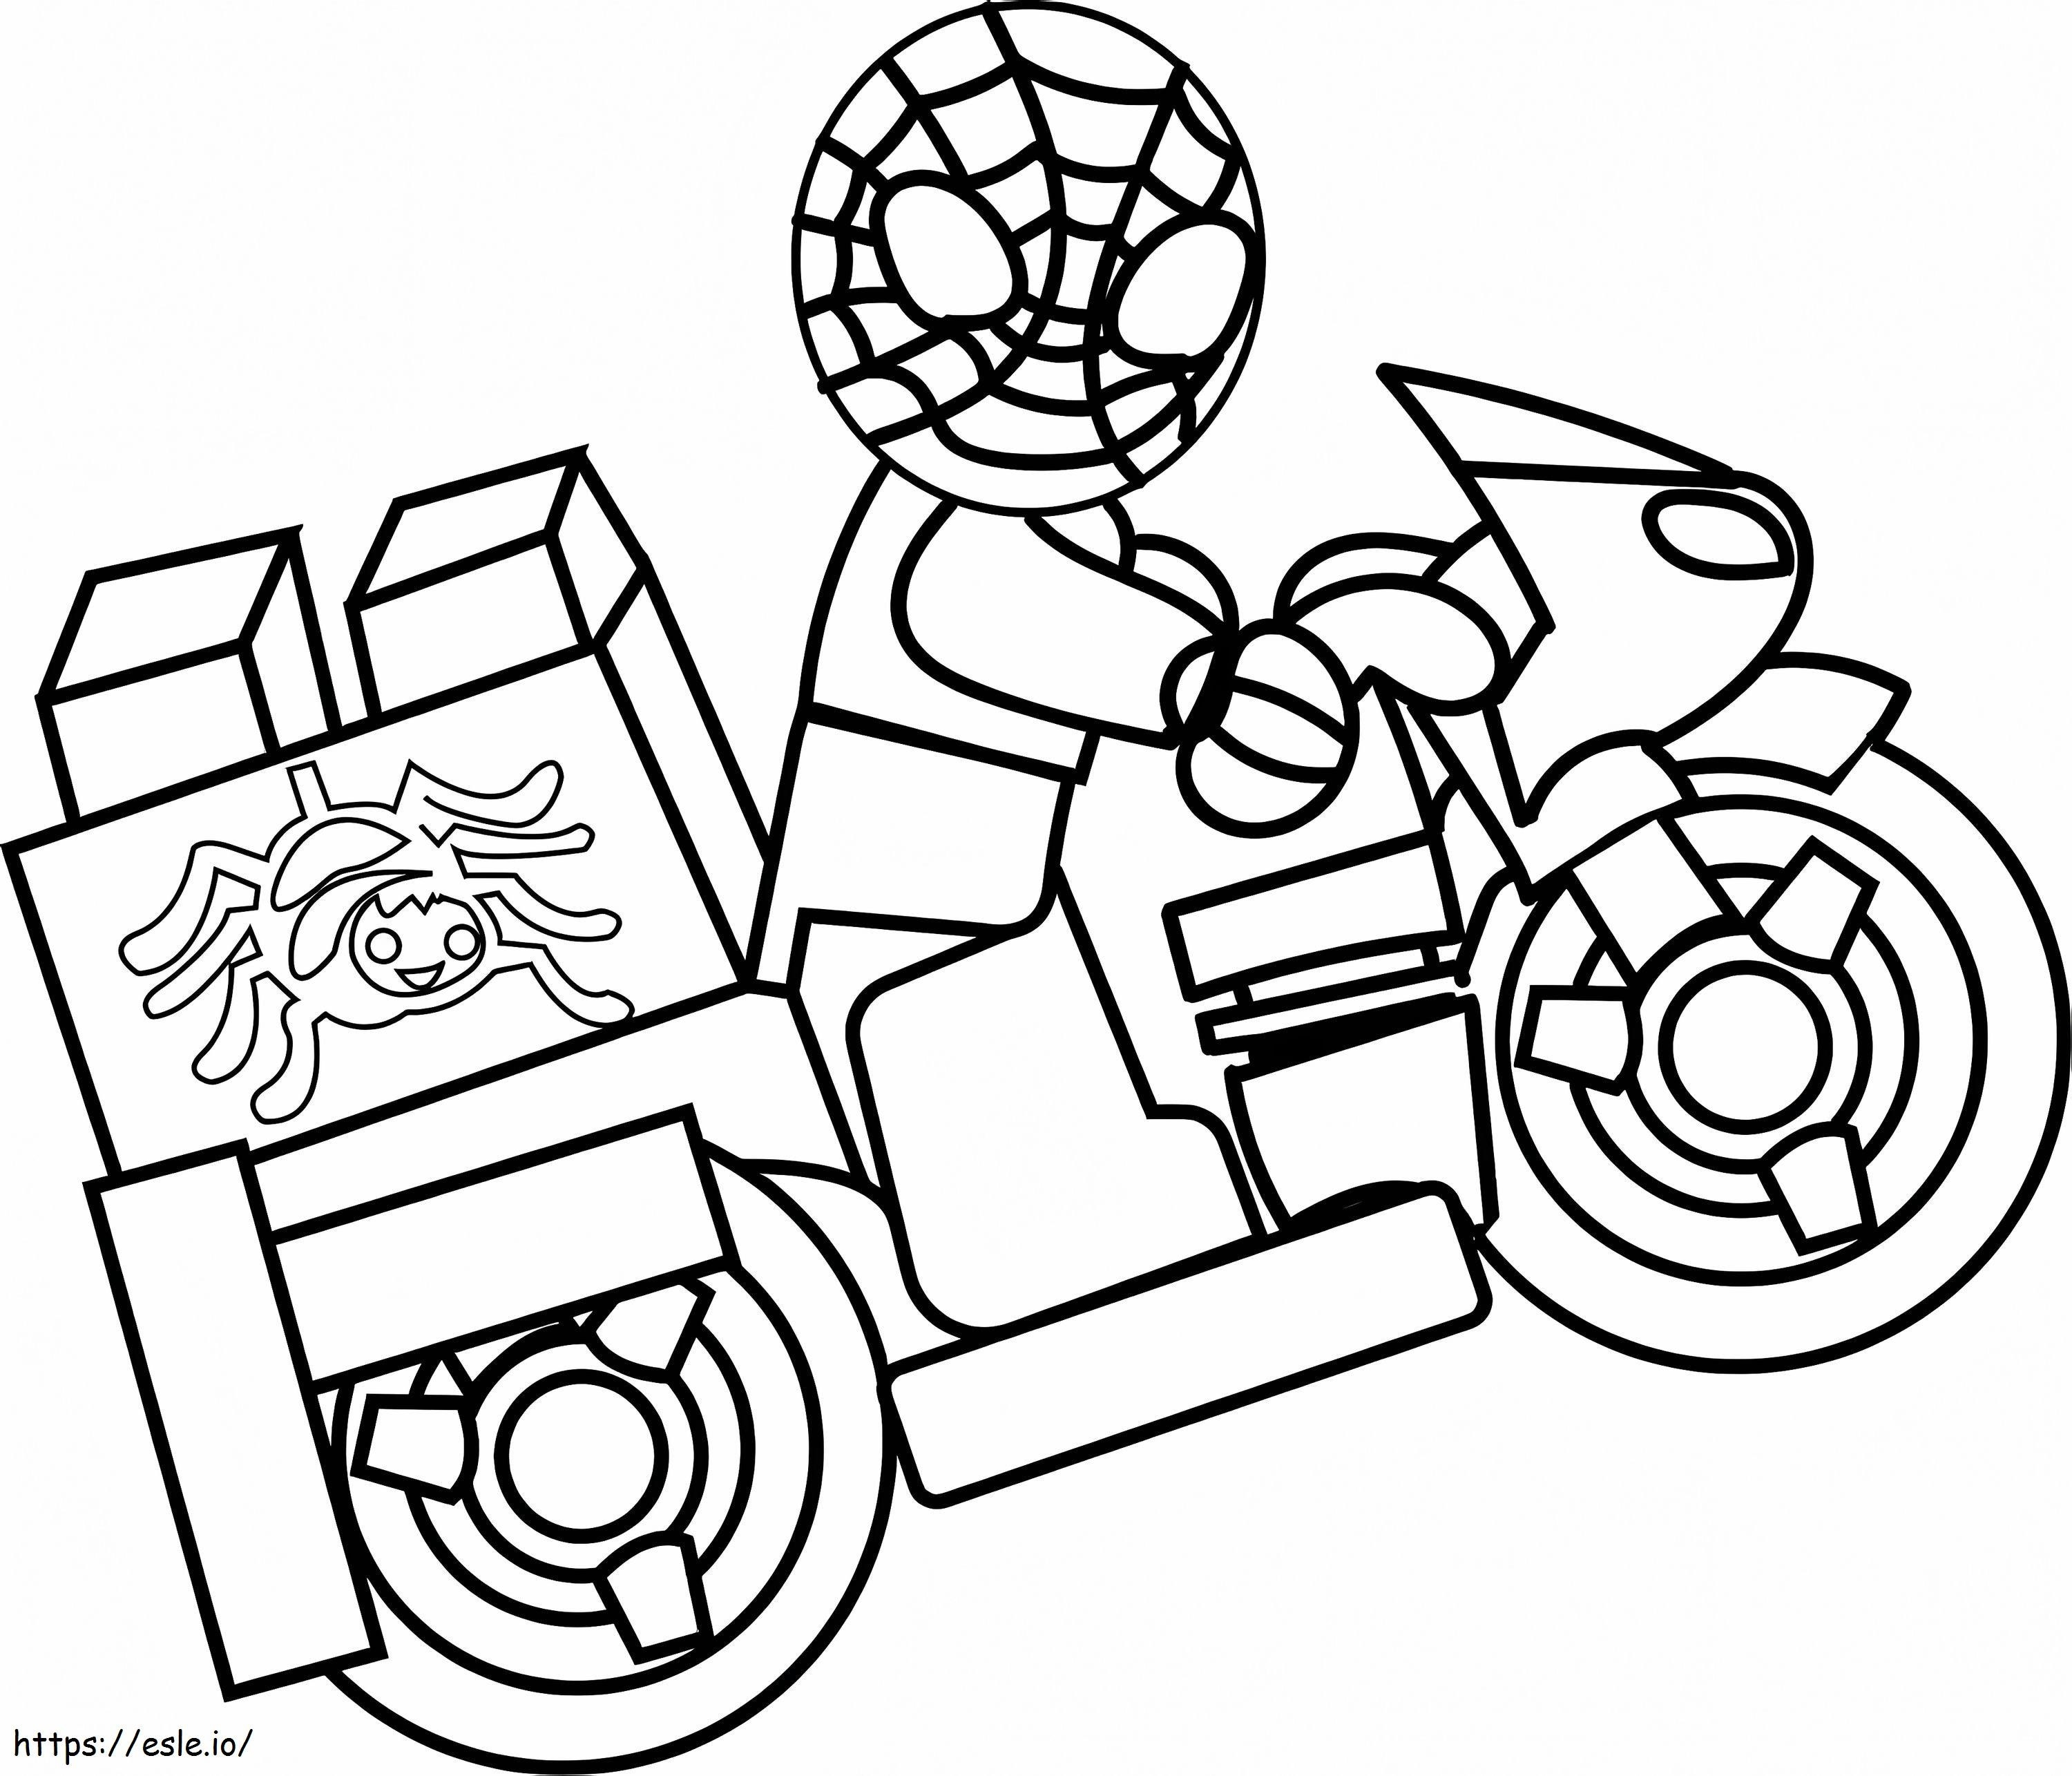 Lego Spiderman On Motobike coloring page